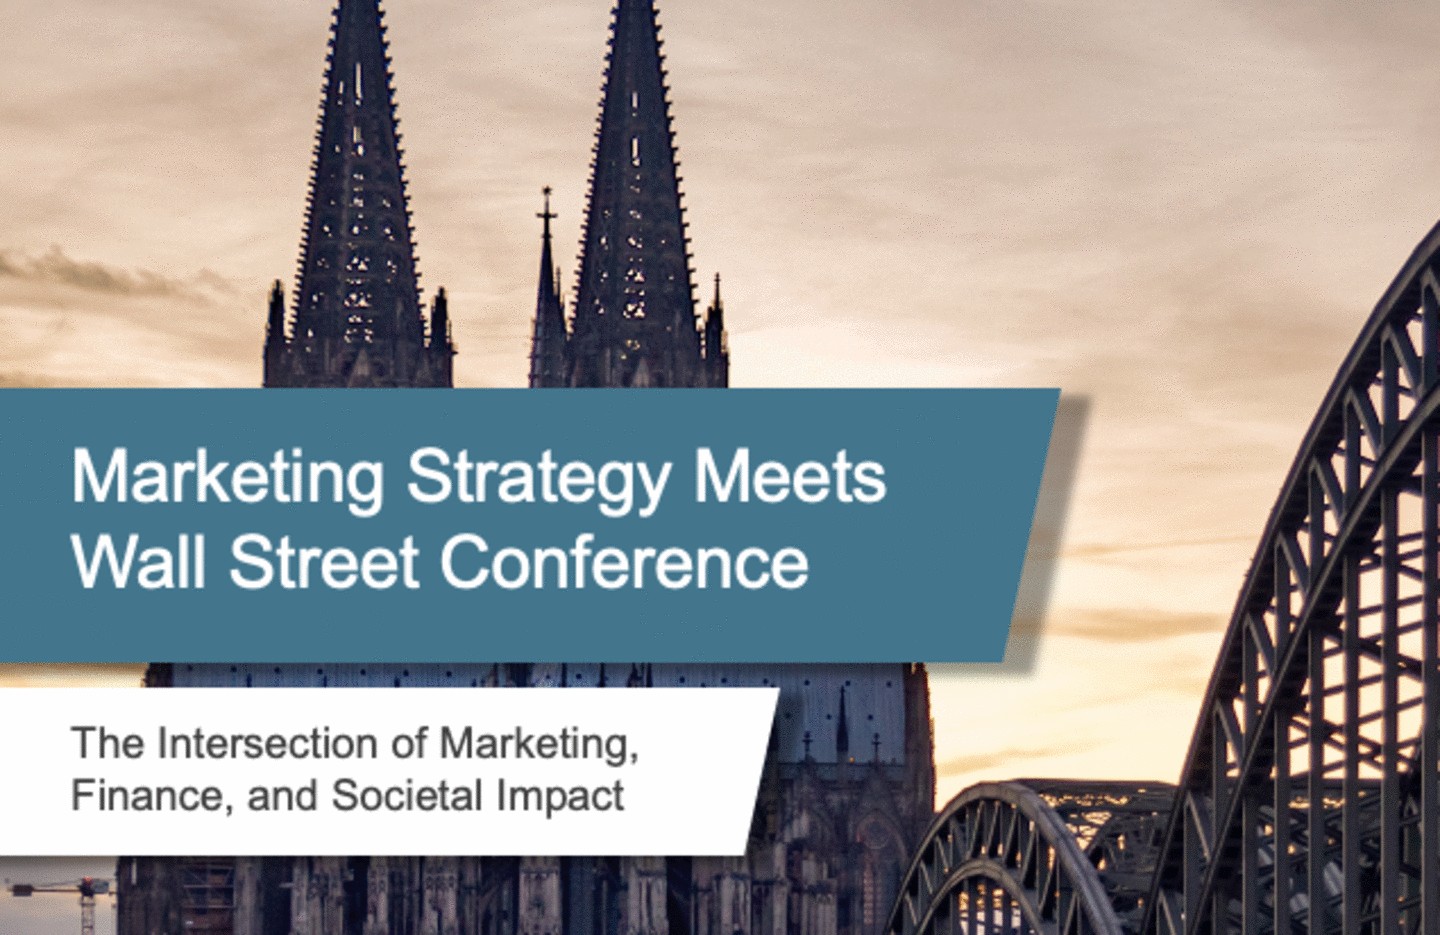 Marketing Strategy Meets Wall Street Conference